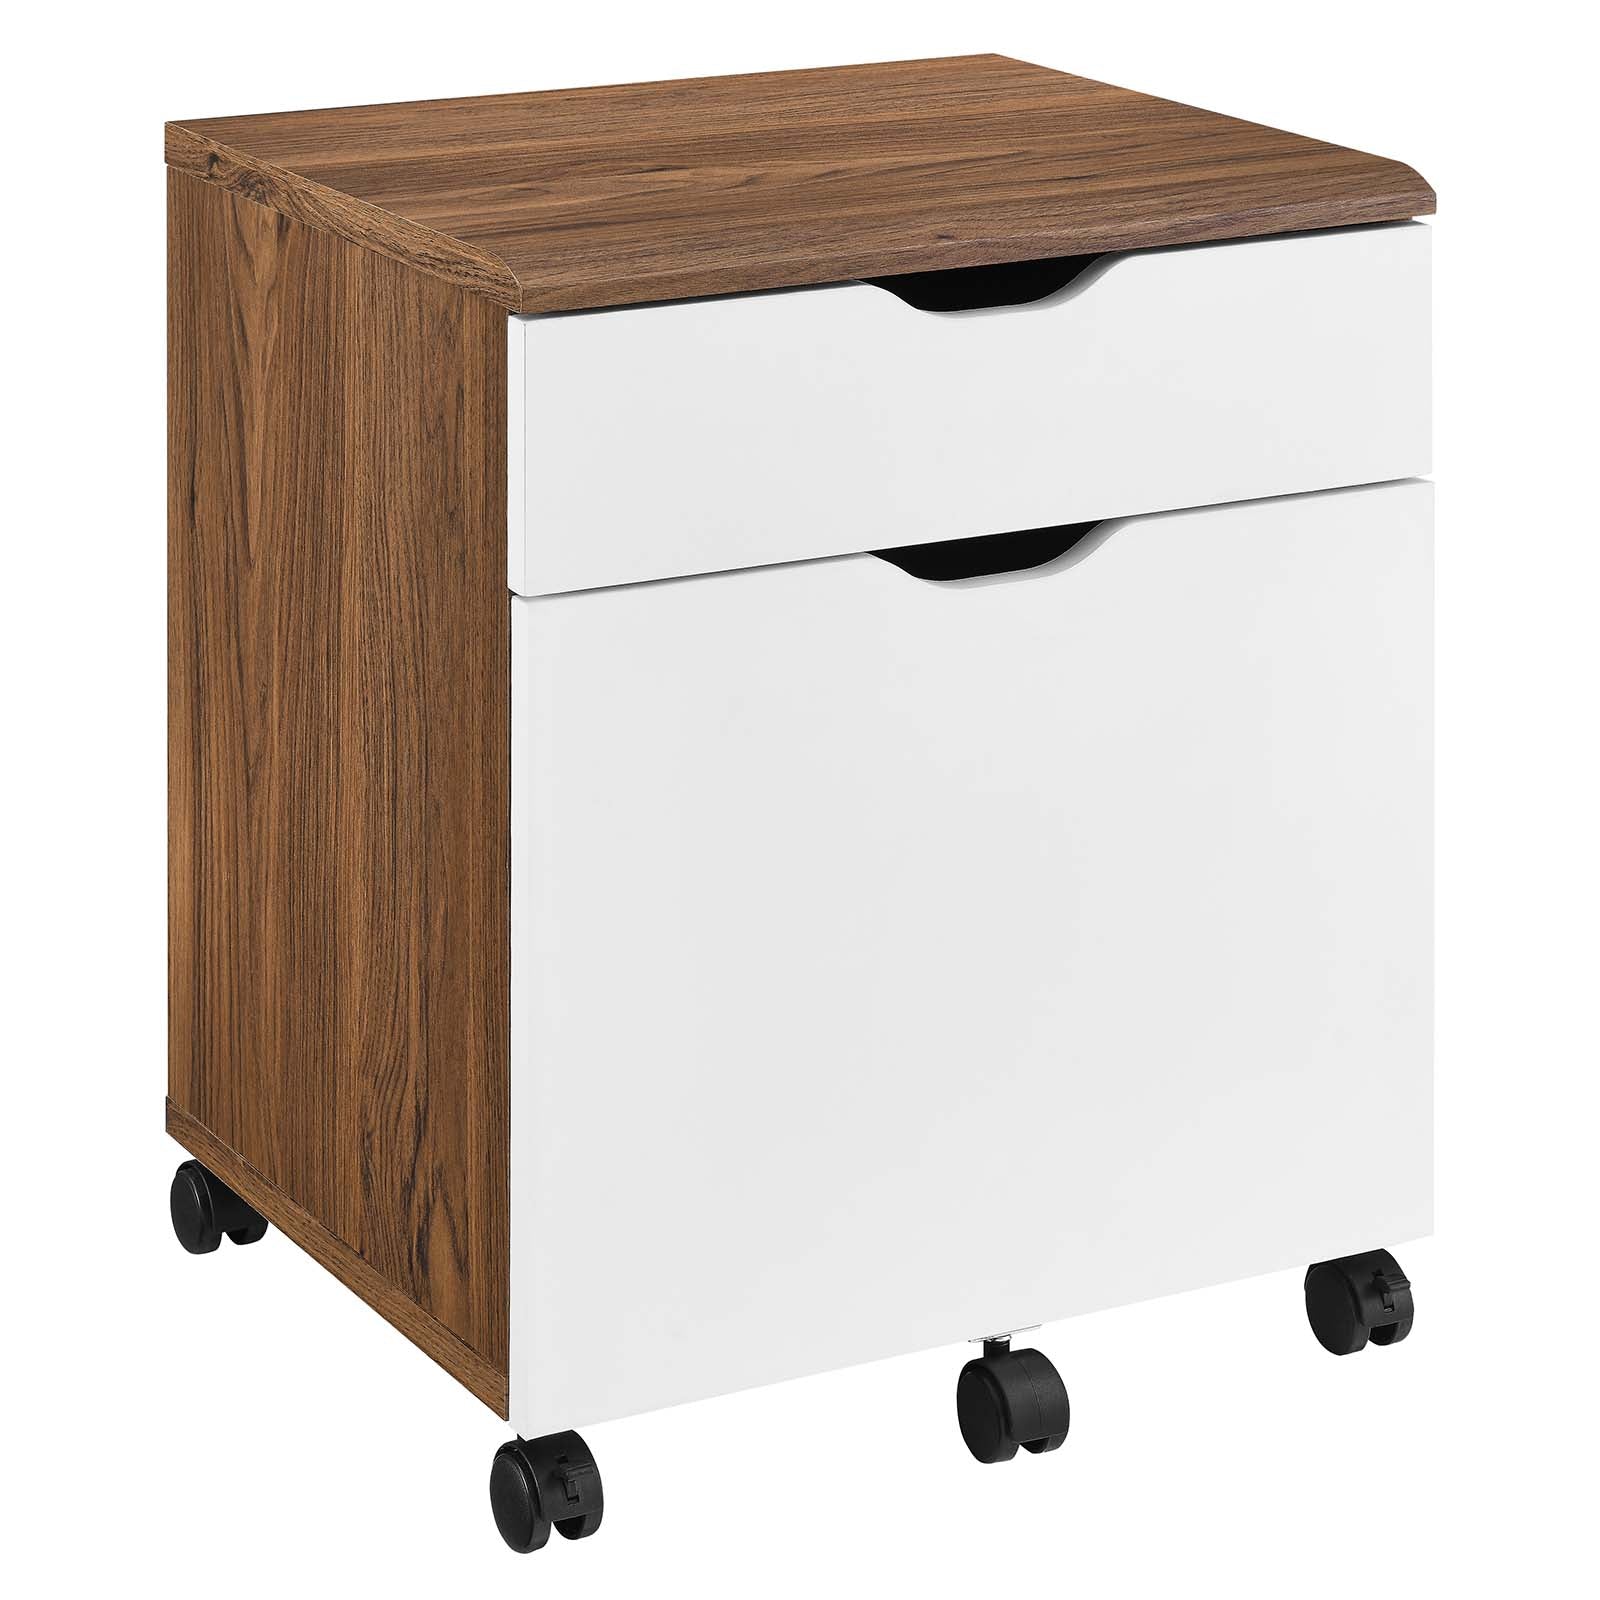 Modway File Cabinets - Envision Wood File Cabinet Walnut White